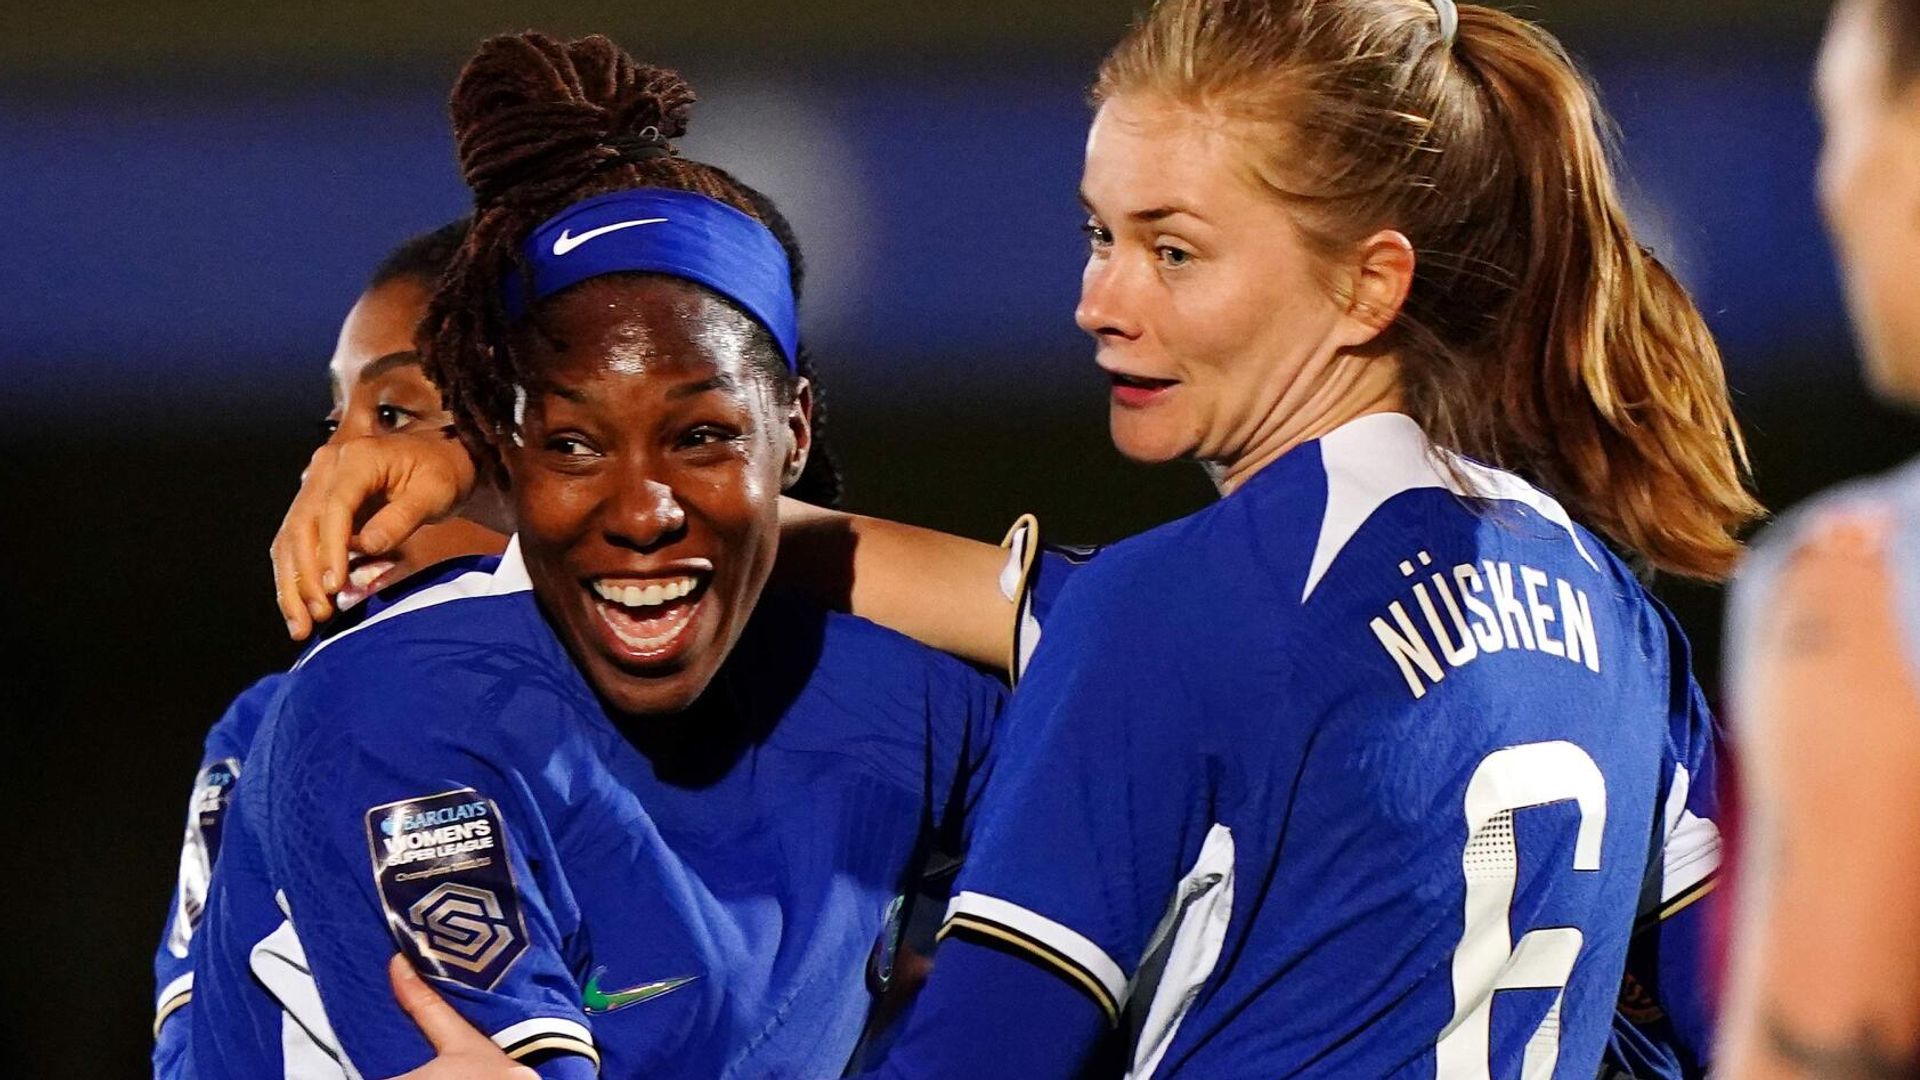 WSL: Chelsea 3-0 up on 10-player Aston Villa LIVE! & highlights